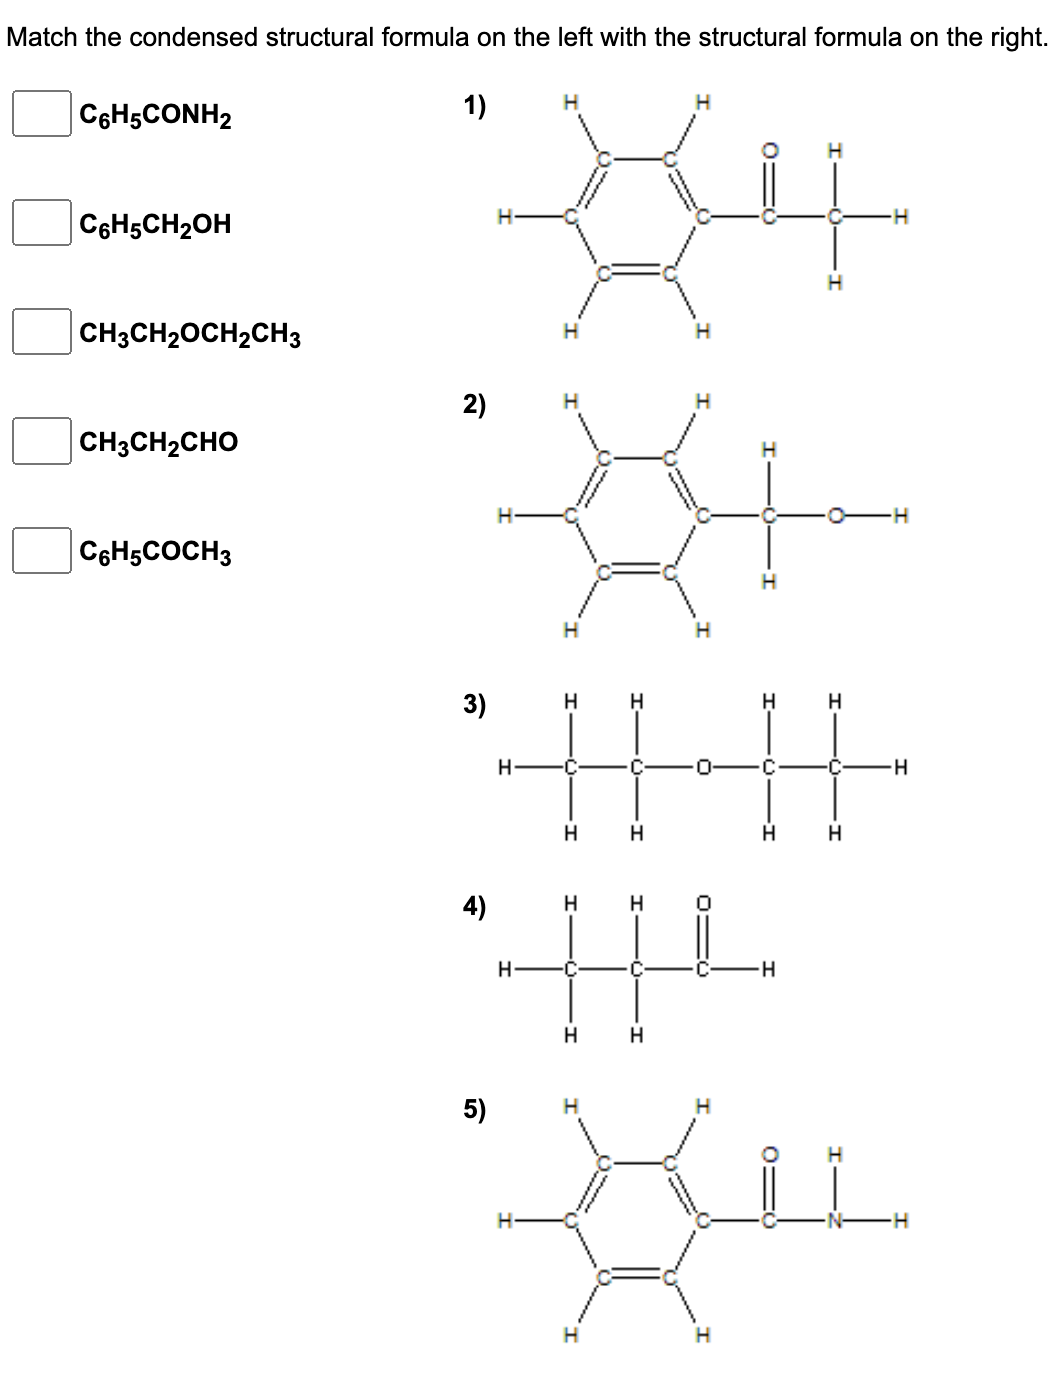 Match the condensed structural formula on the left with the structural formula on the right.
C6H5CONH2
1)
H
C6H5CH₂OH
-H
CH3CH₂OCH₂CH3
CH3CH2CHO
C6H5COCH3
2)
H
5)
H
H
3)
H
H
H
-||-·||-
H
C
C
H
H H
H
H
4)
H
H
HL
H
C
-H
H H
H
X
H
0=
H
-H